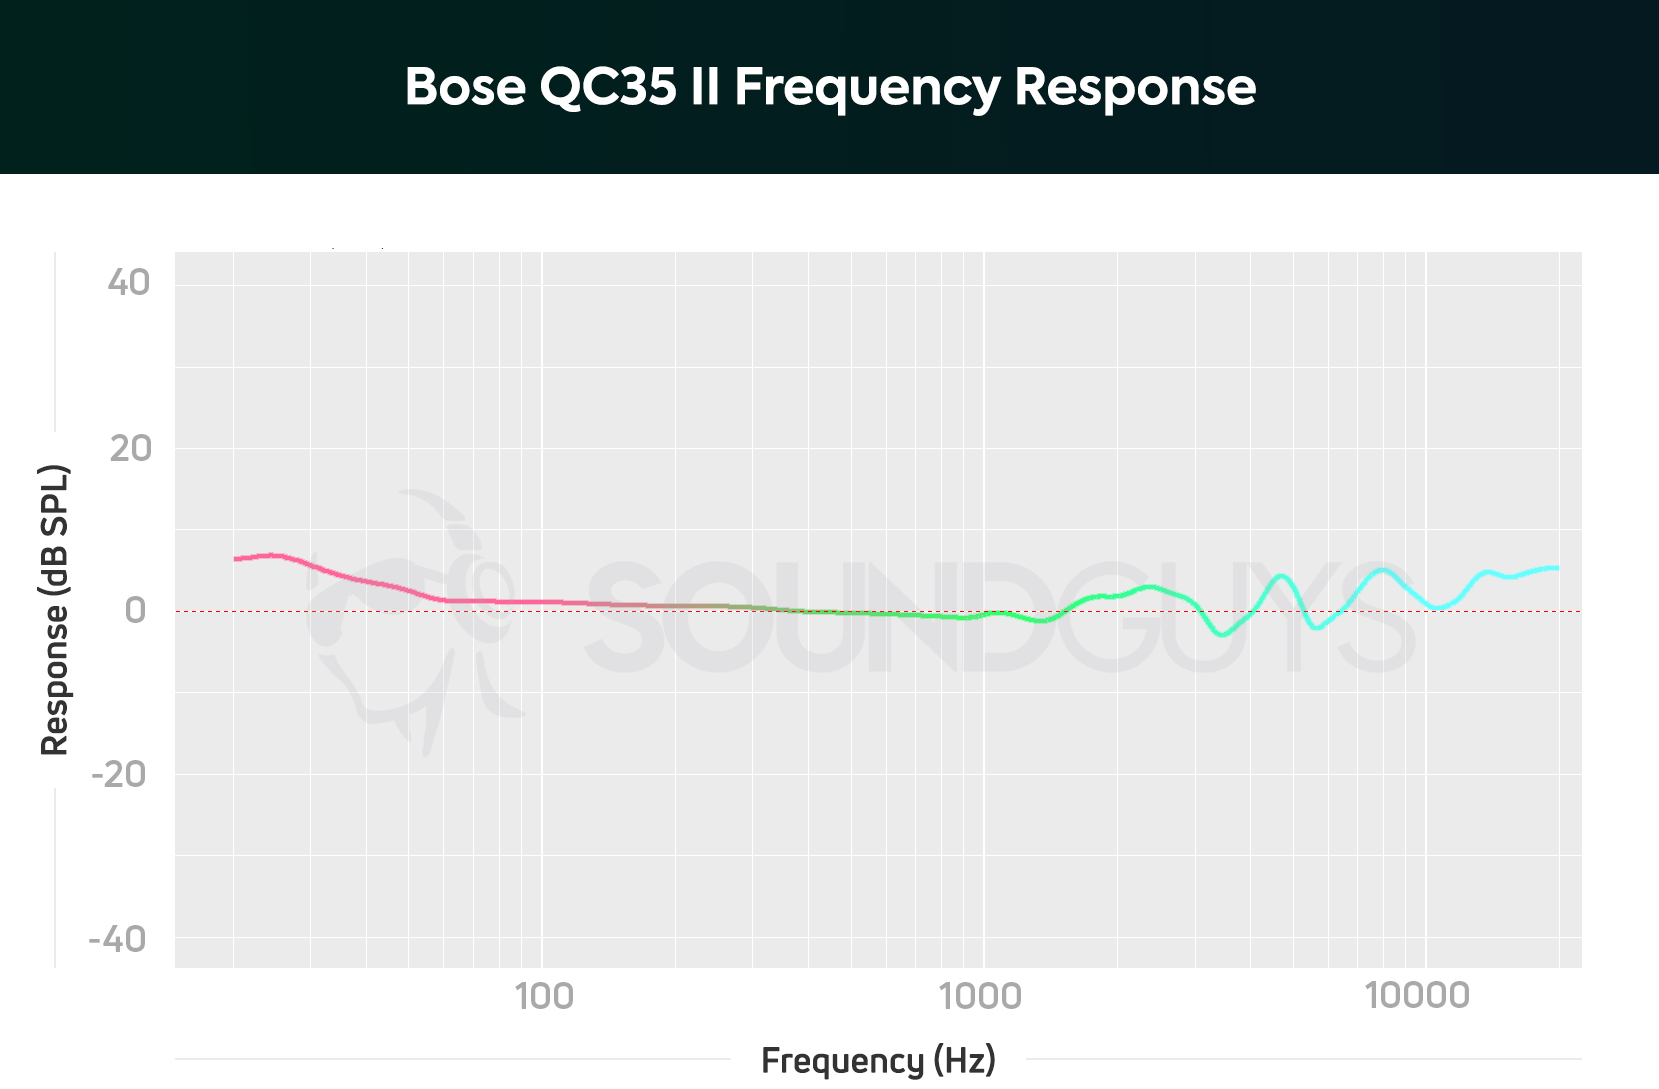 A chart detailing the frequency response of the Bose QC35 II.